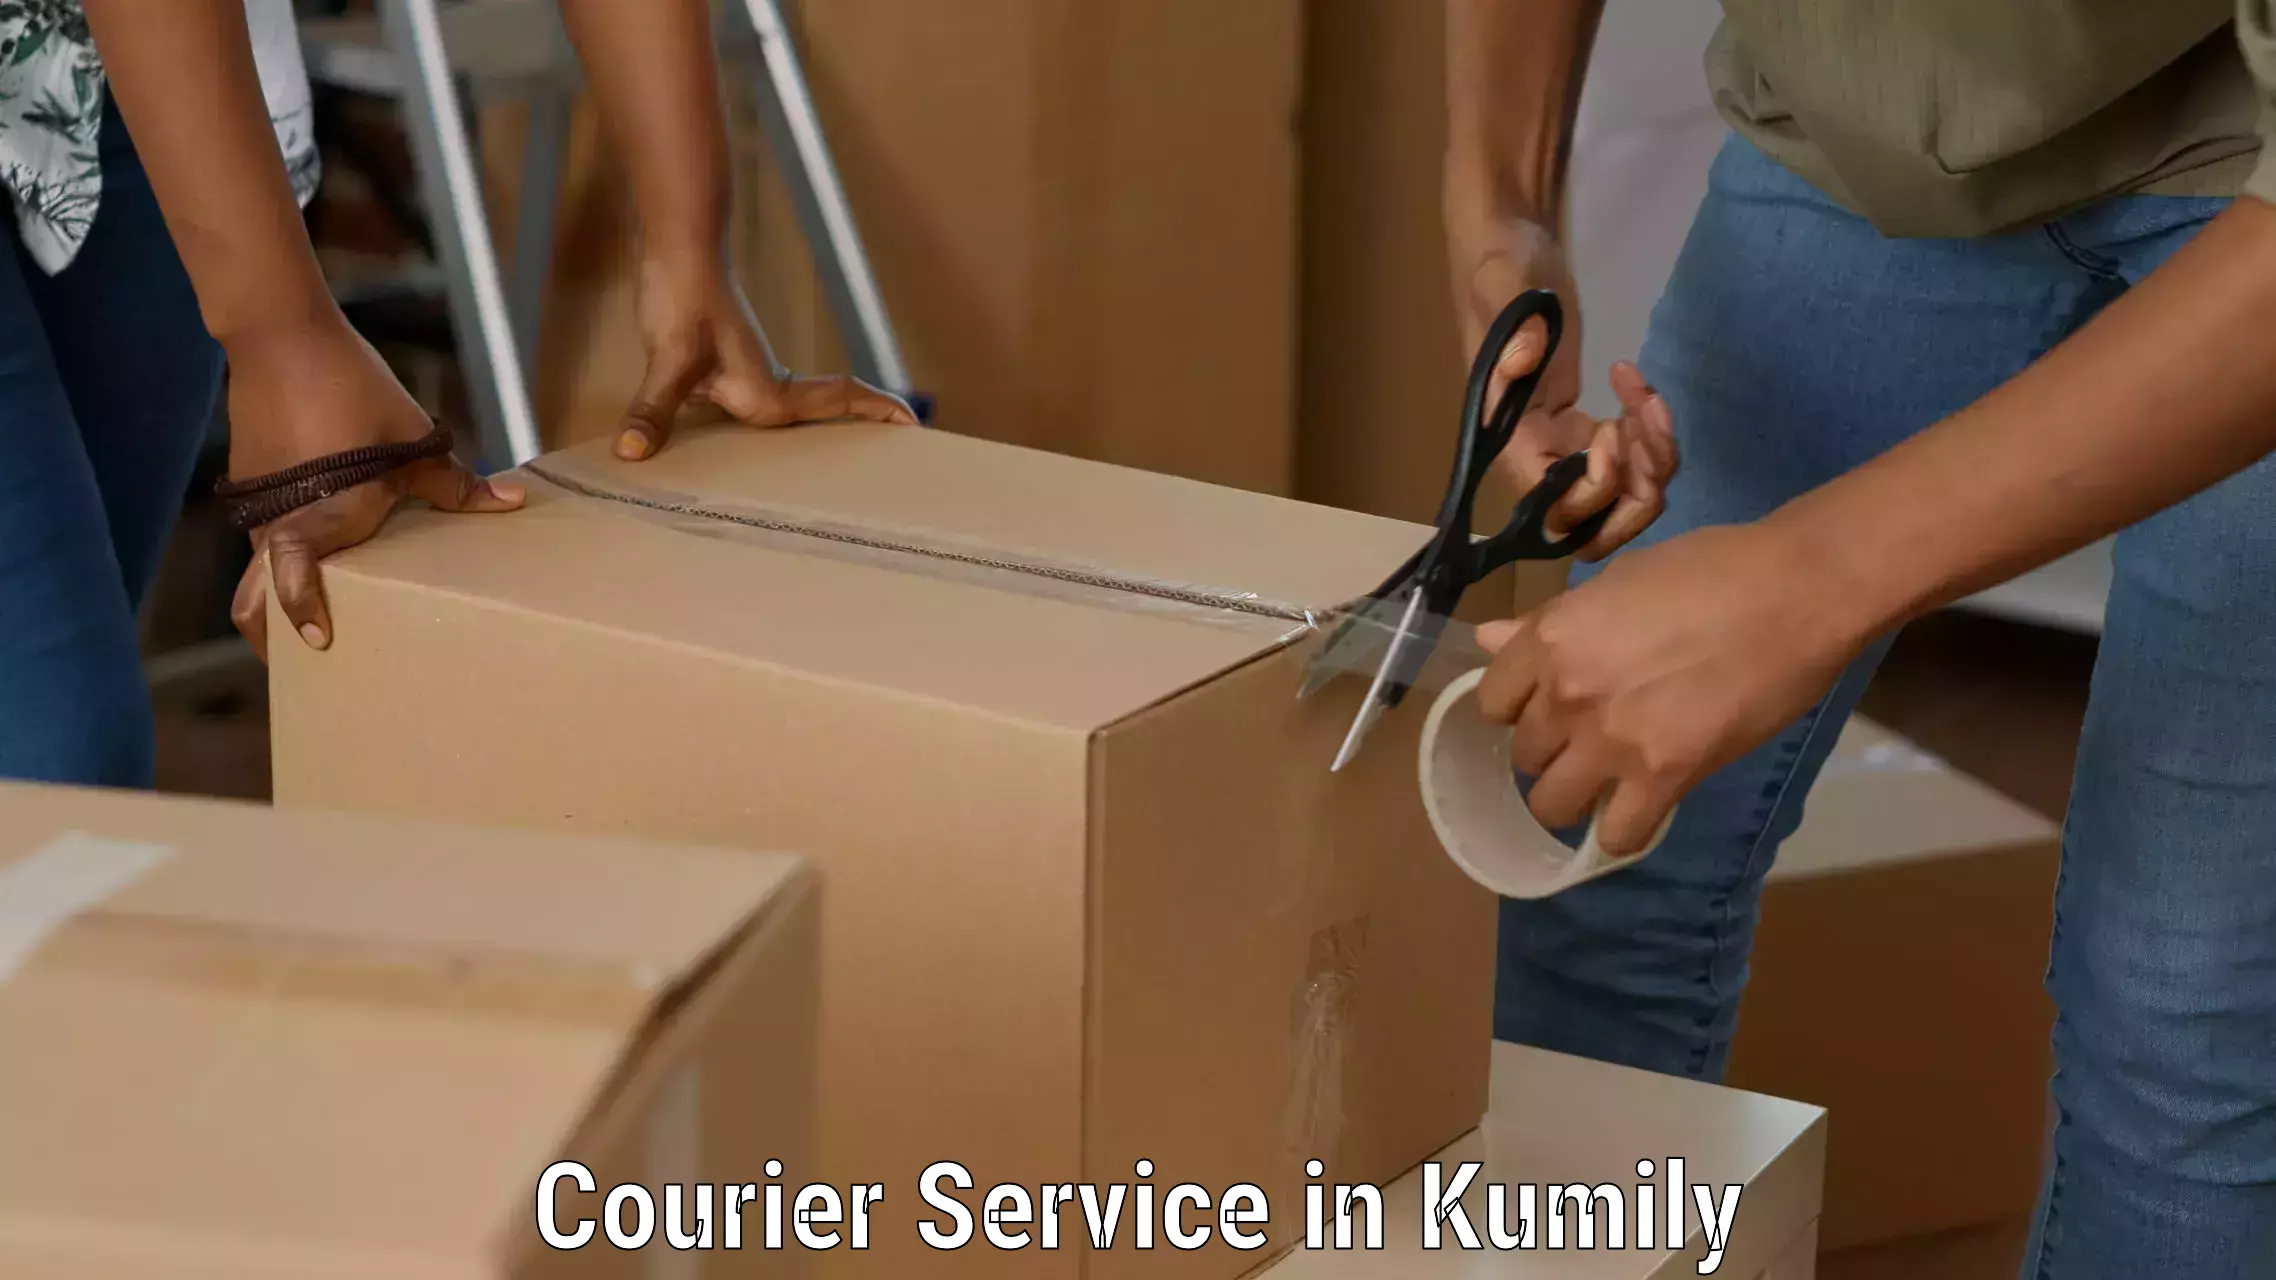 Flexible parcel services in Kumily